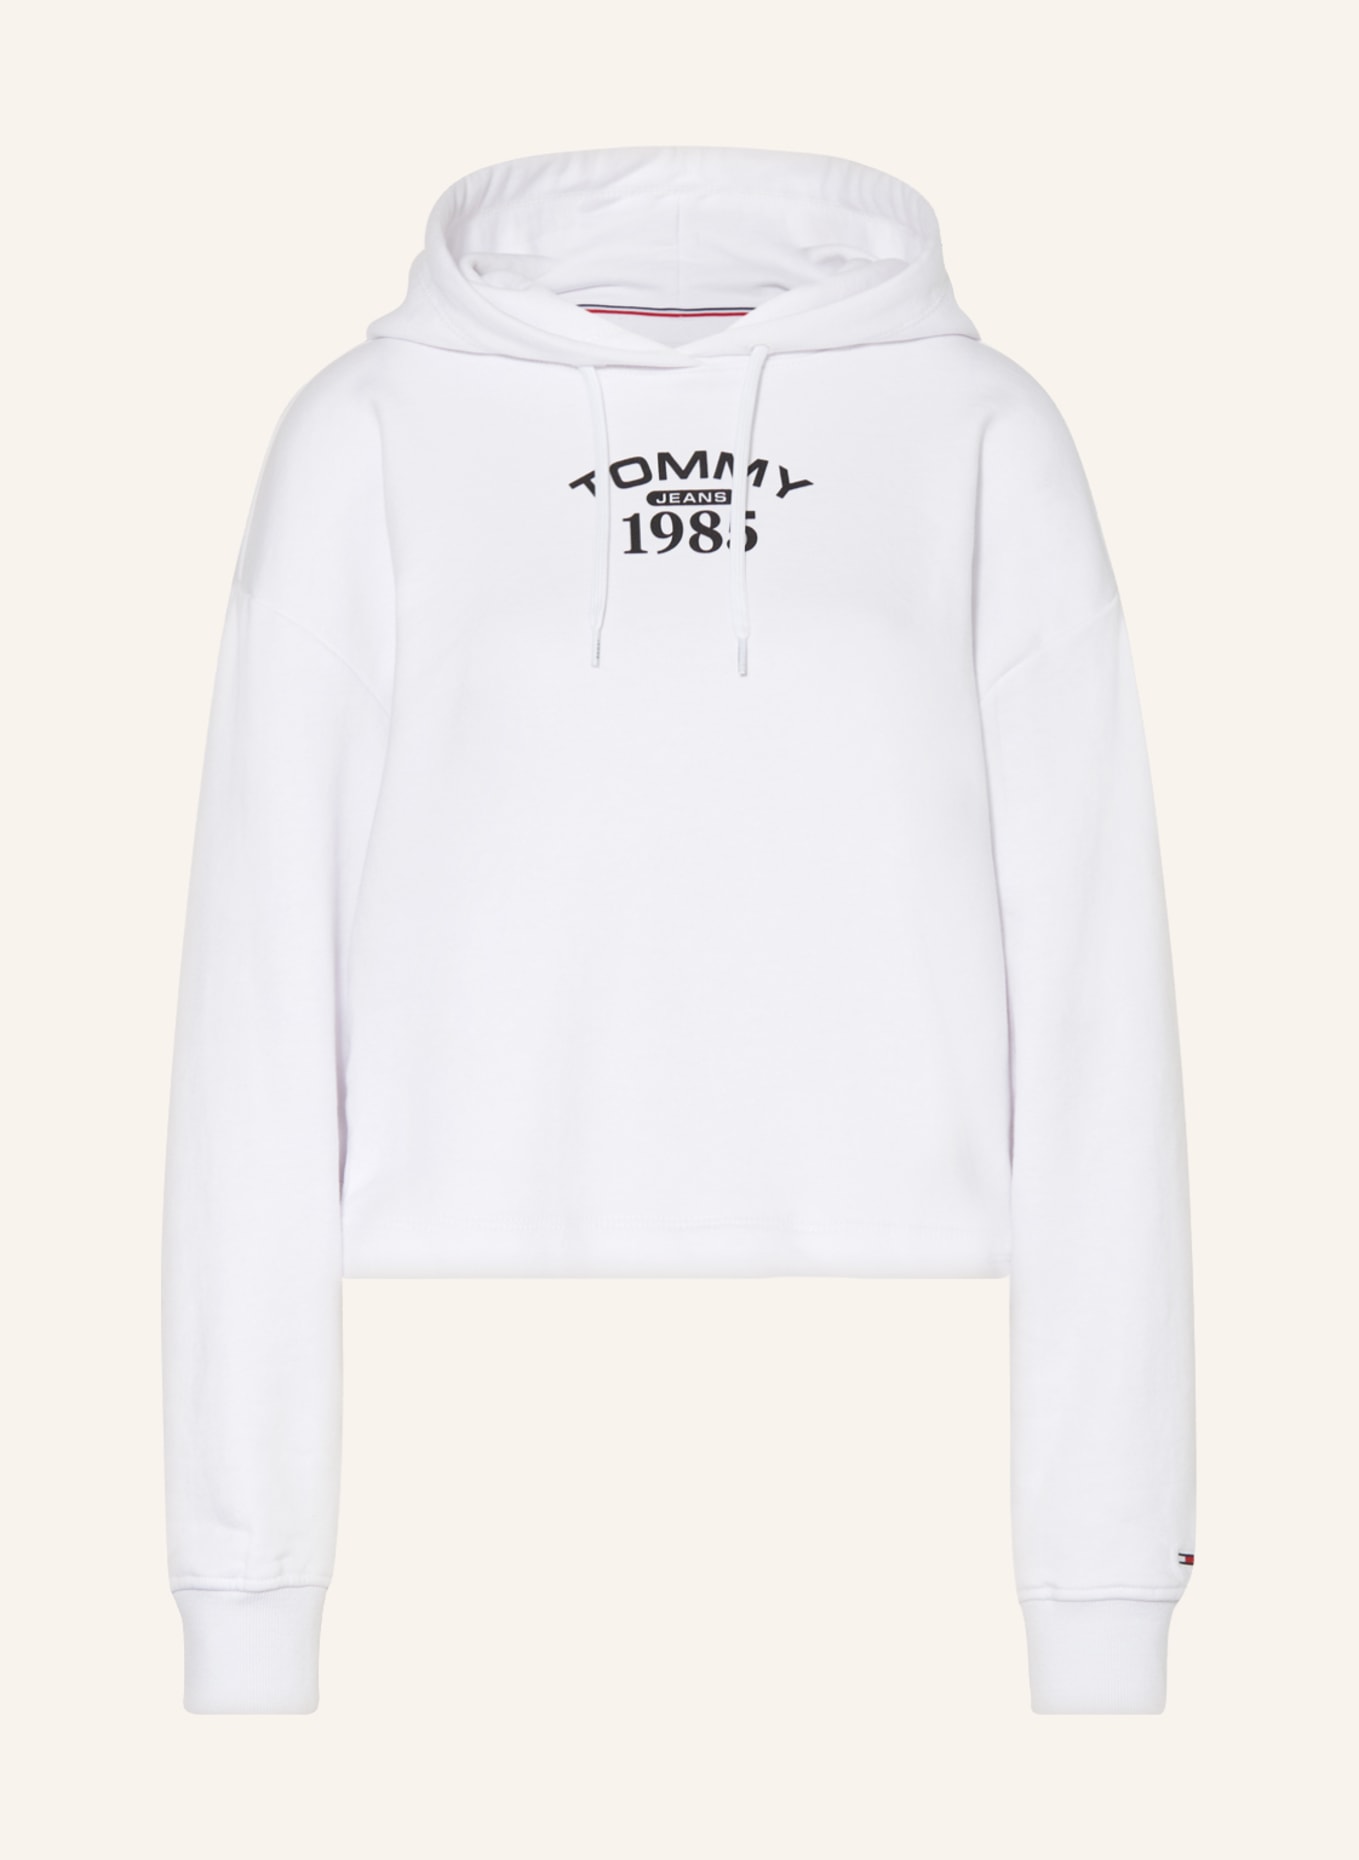 TOMMY JEANS Hoodie, Farbe: WEISS (Bild 1)